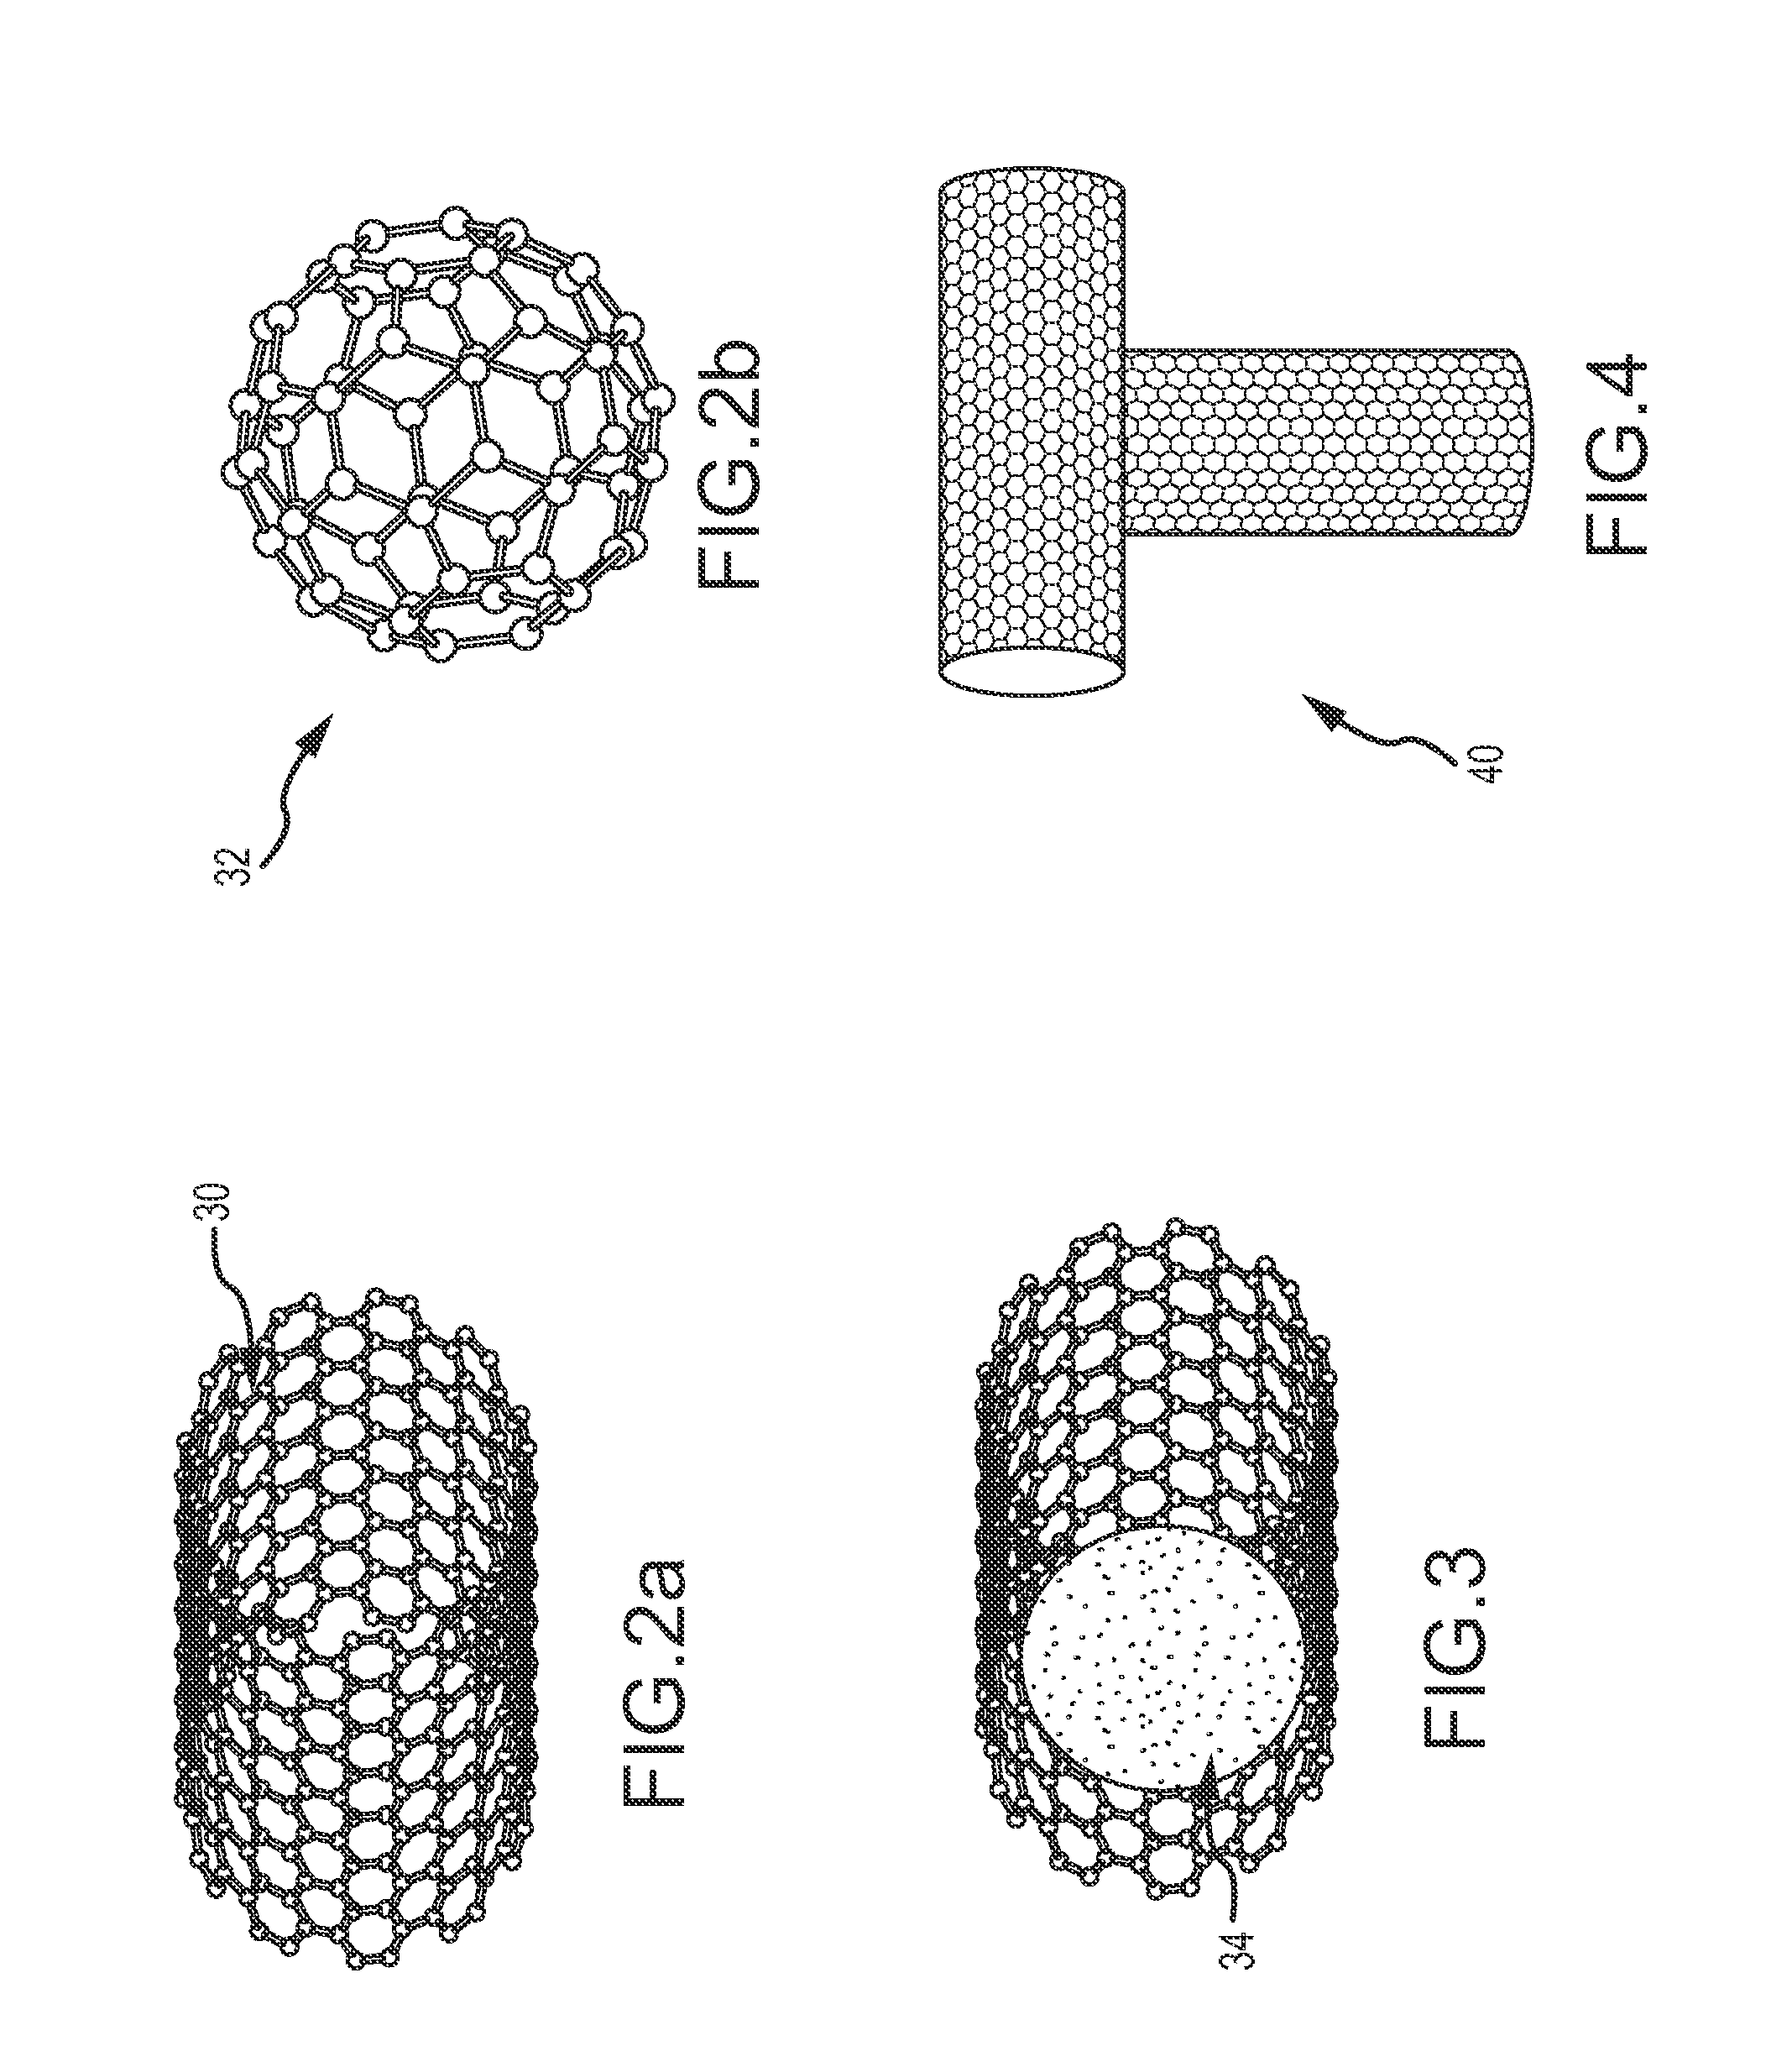 Method and Apparatus for improved internal combustion of fuel/oxidizer mixtures by nanostructure injection and electromagnetic pulse ignition